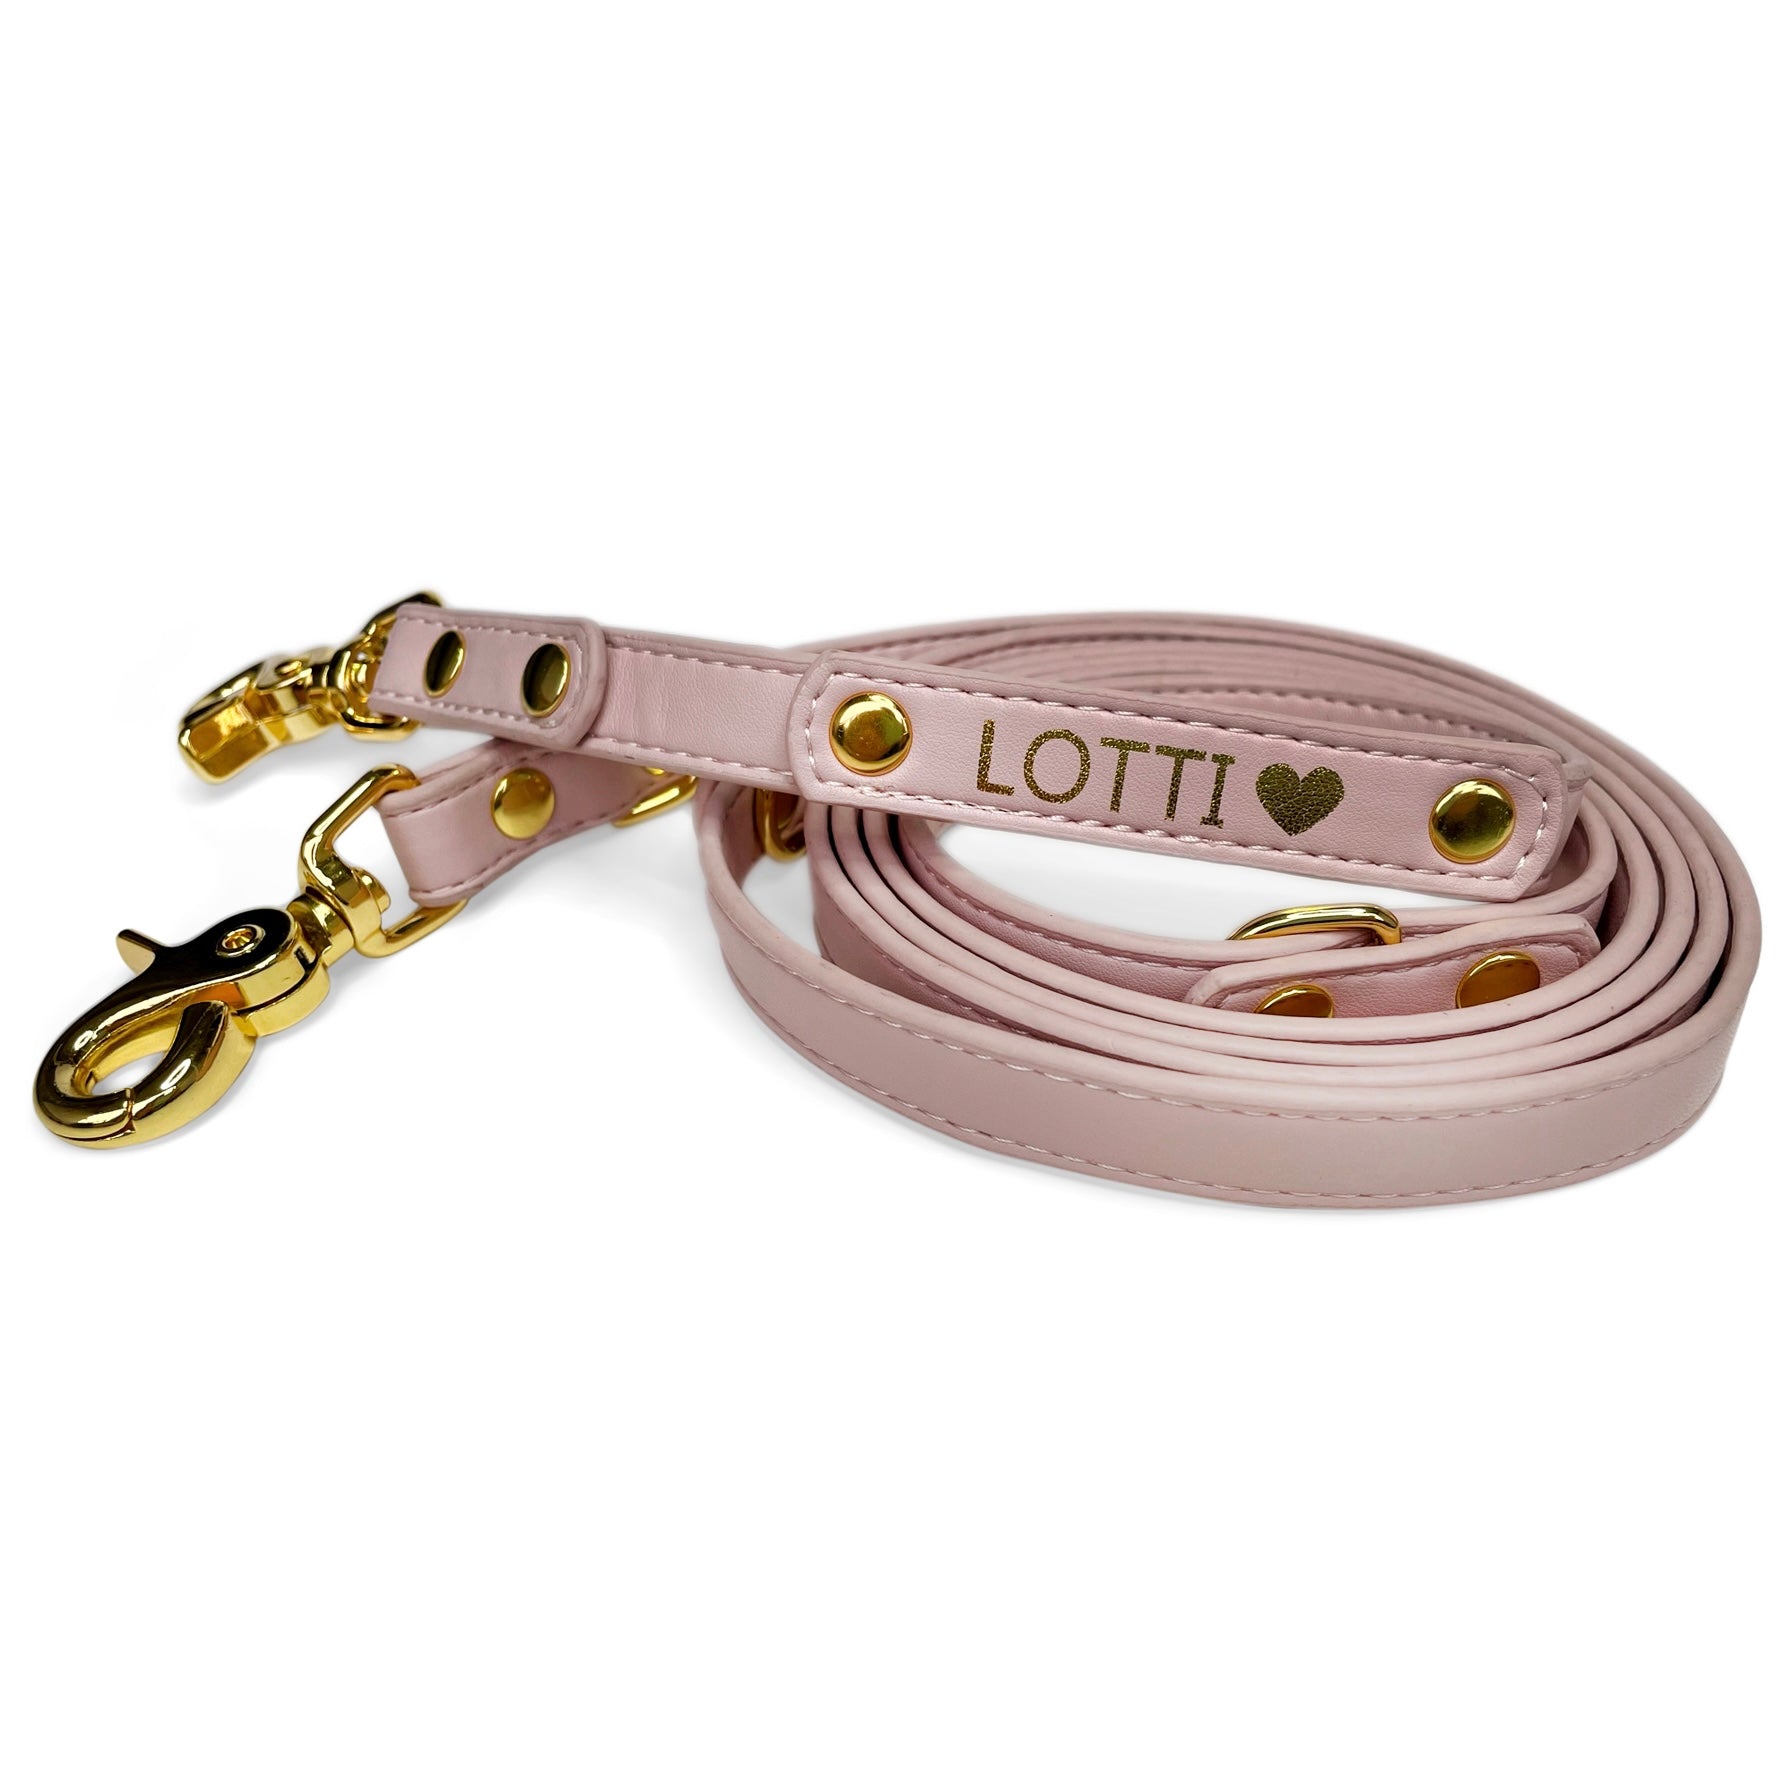 NEW IN: Classic adjustable leash pastel pink